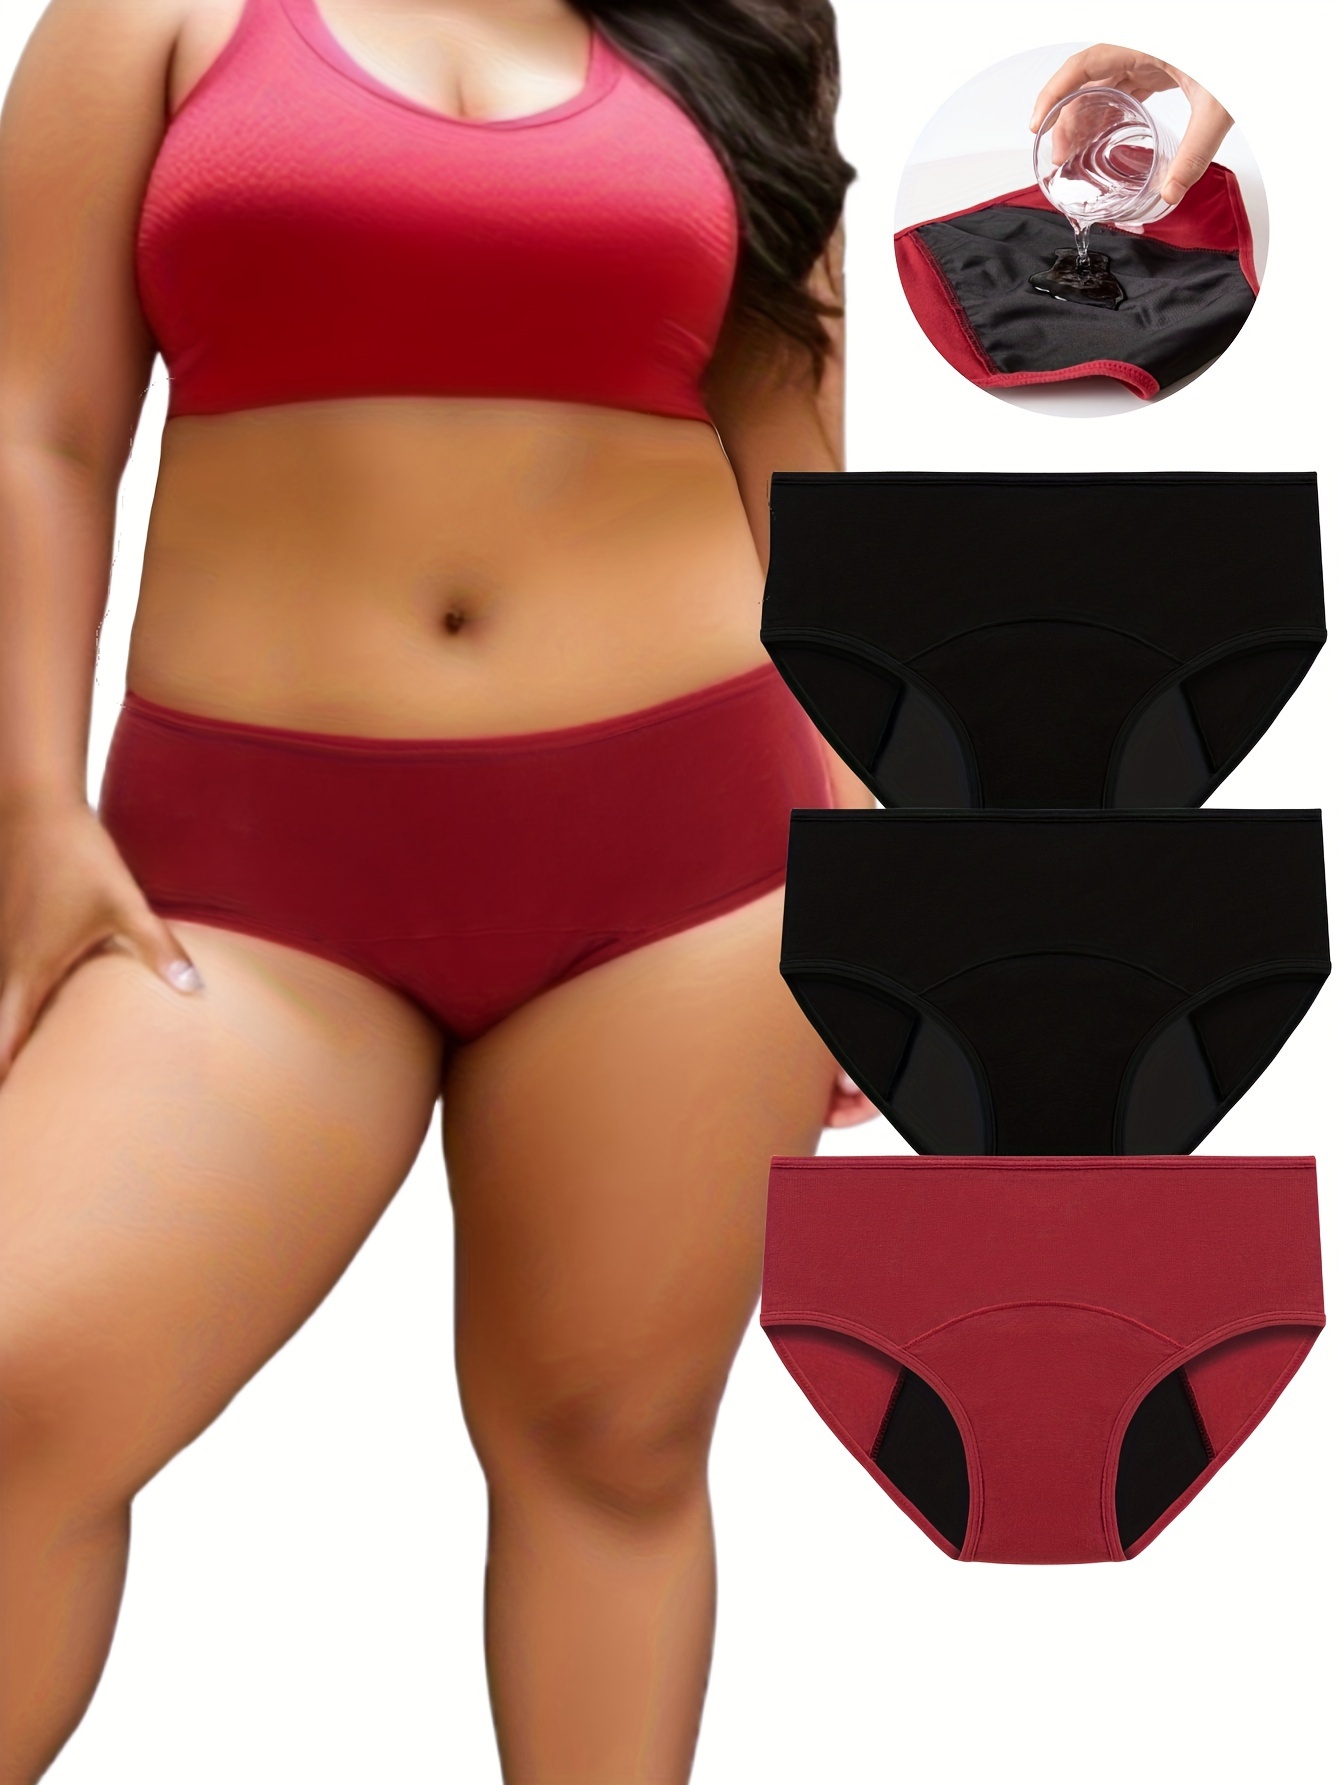 nsendm Female Underwear Adult plus Size Strapless Bra 46ddd Cute Young  Ladies Transparent Lace Top and Thong plus Size Lingerie for Women(Red, L)